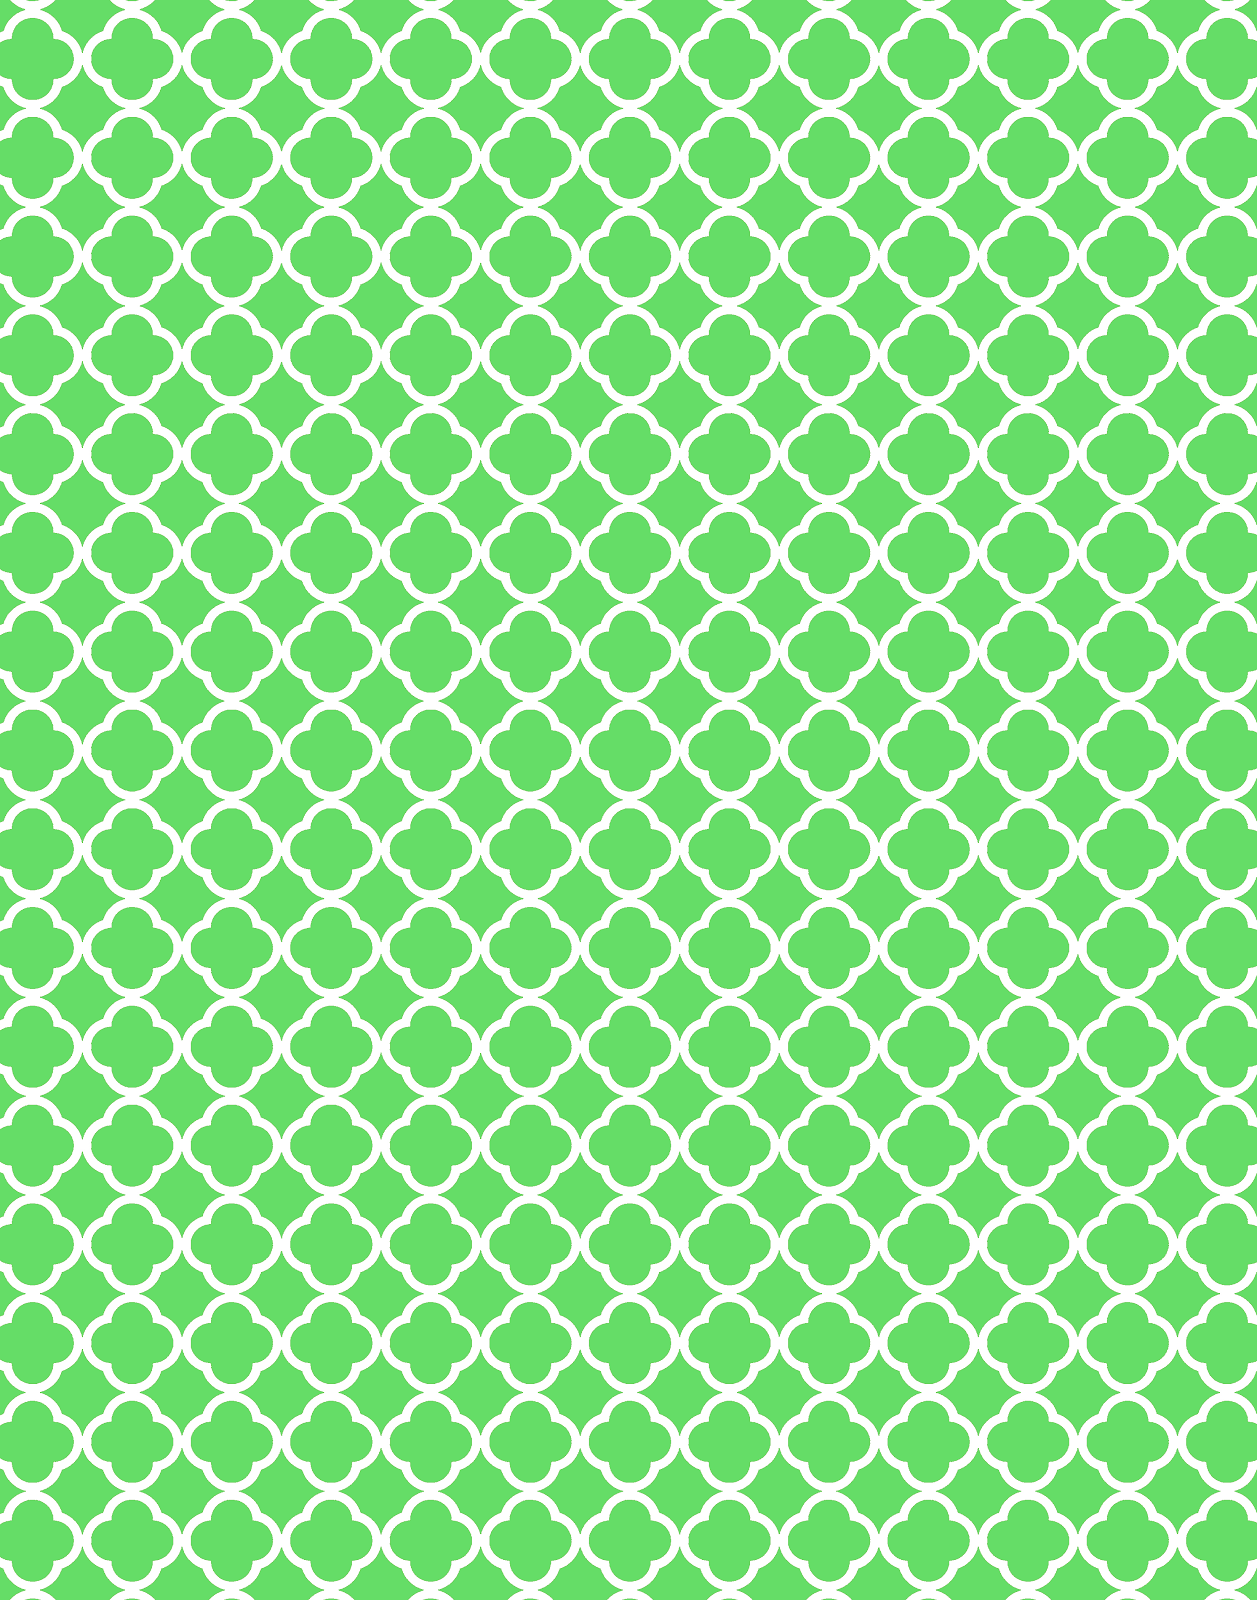 For Lime Green Chevron Background Displaying Image